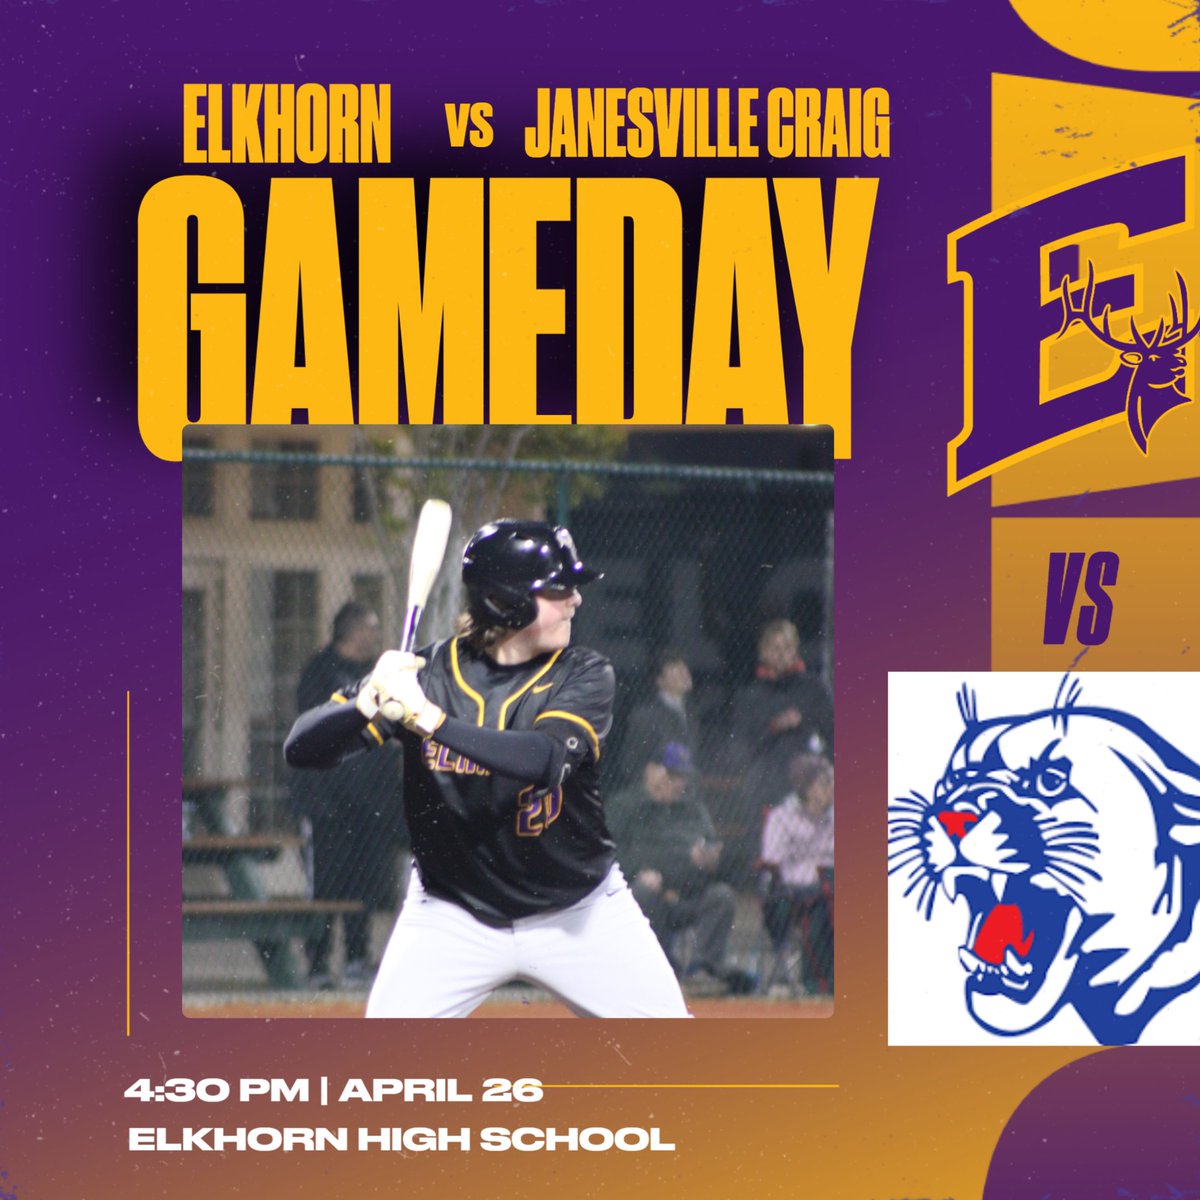 Game Day!  Come out and support these guys as they take on Janesville Craig at home in a non-conference game!  @EAHS_Baseball #1Herd #goelks